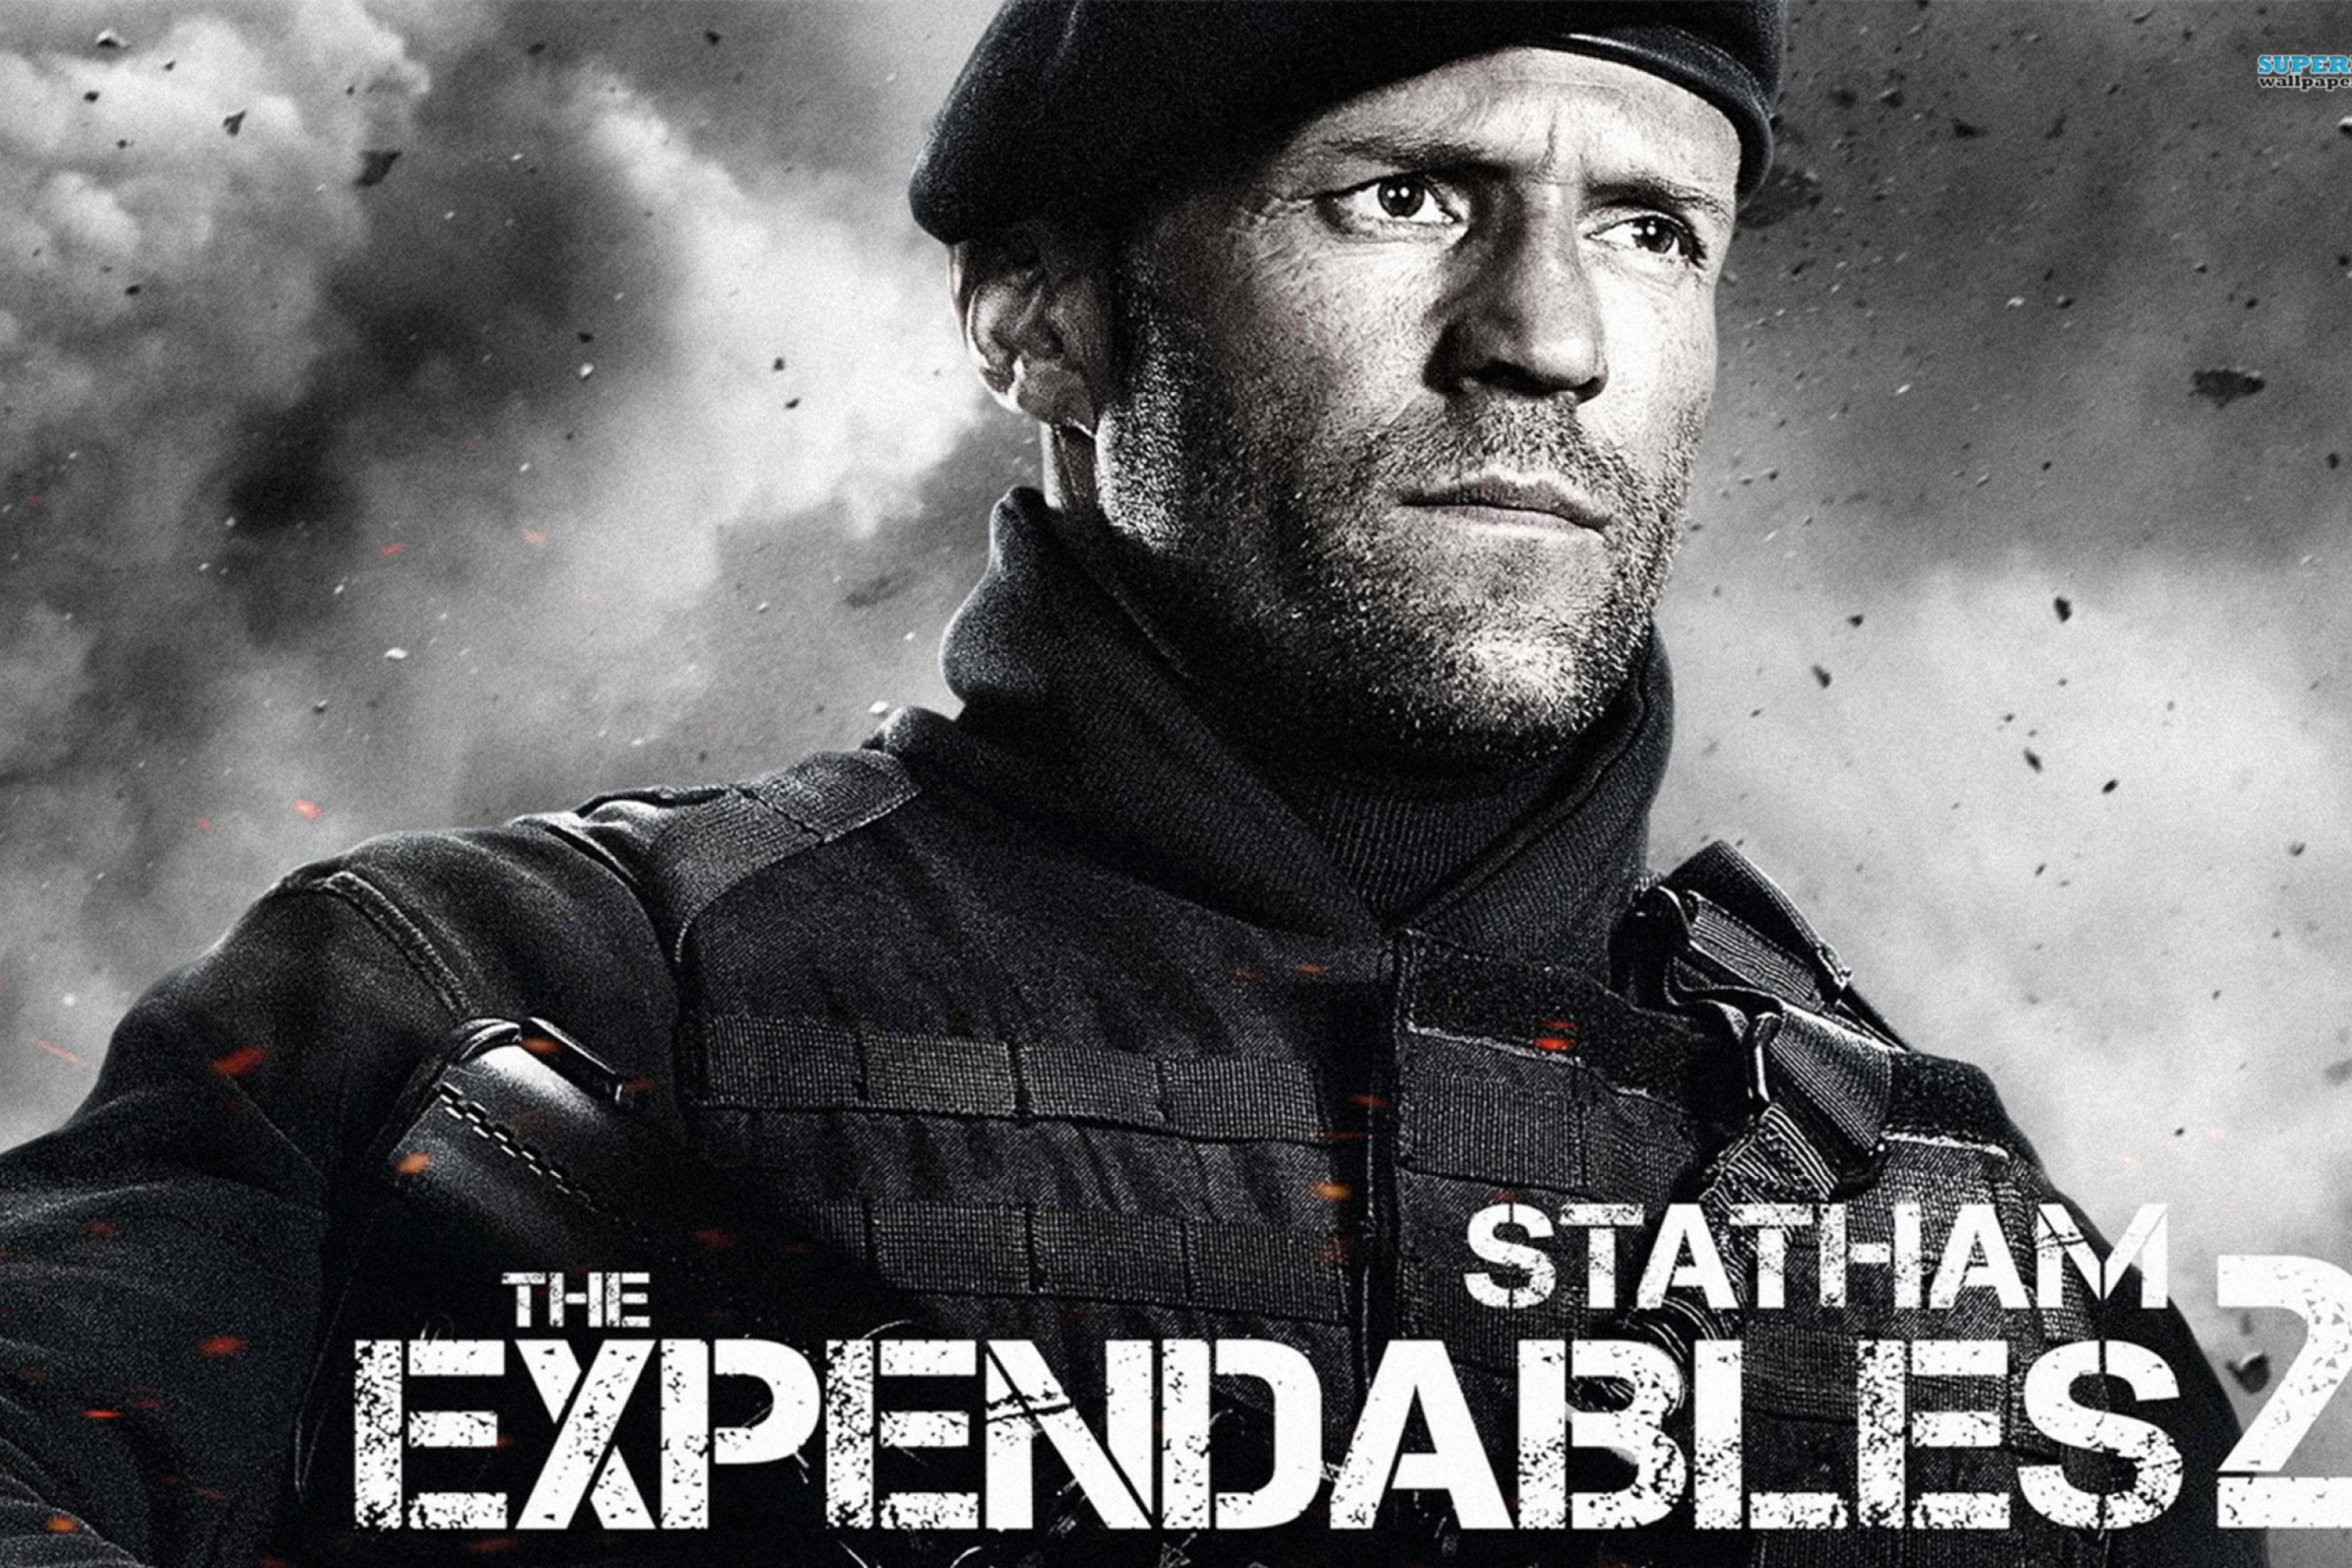 The Expendables 2 - Jason Statham wallpaper 2880x1920